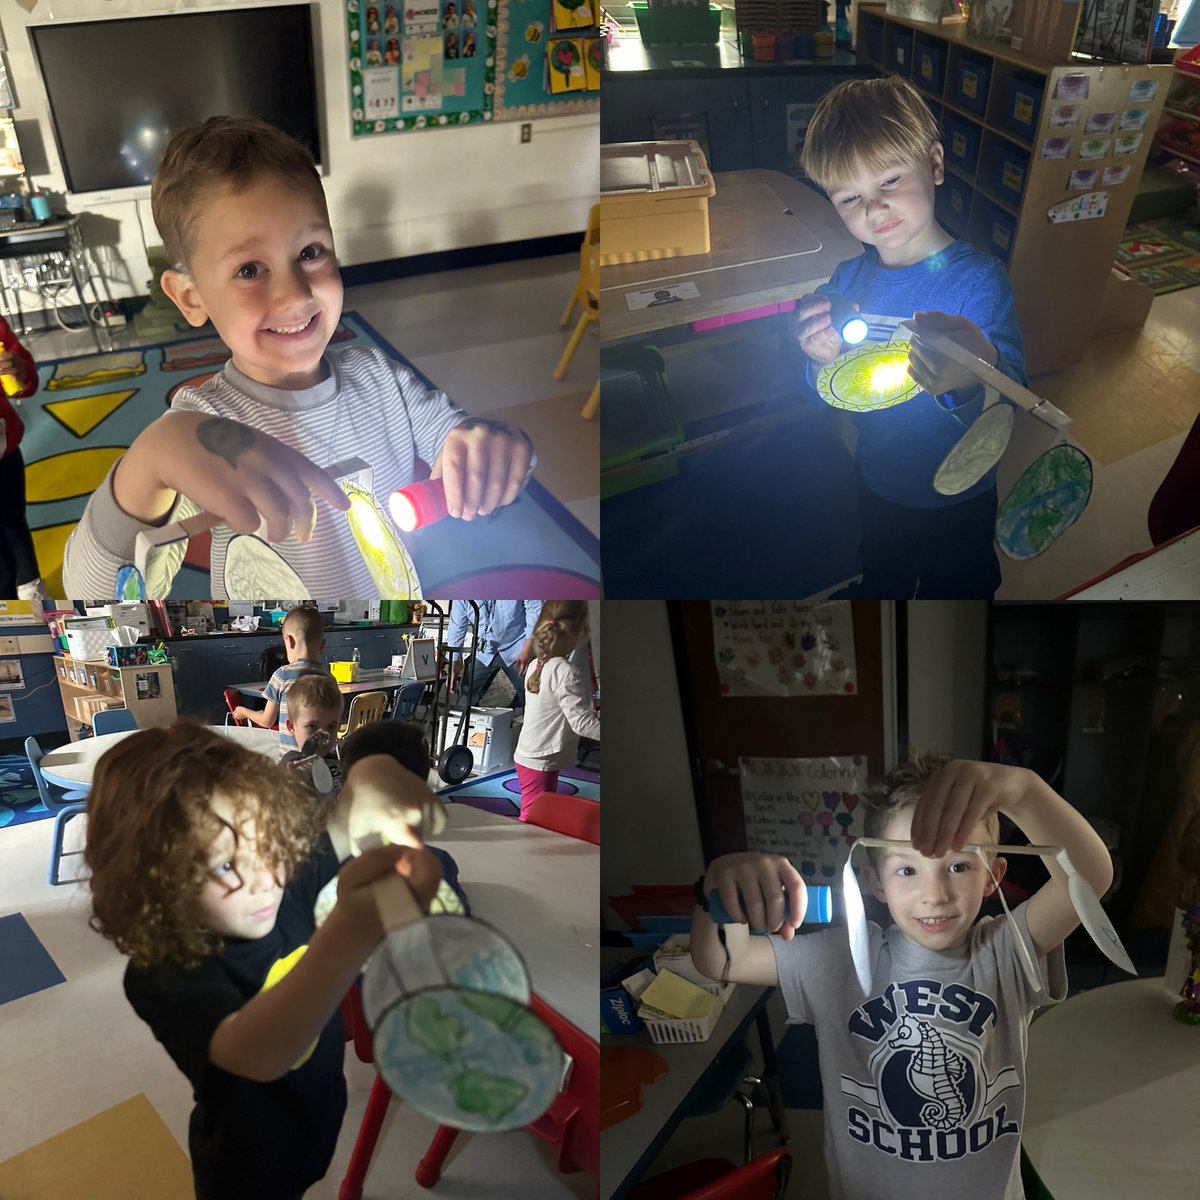 Pre-K students at west learned about the upcoming Solar Eclipse by making their own mobiles! We used flashlights to show how the moon covers the sun’s light. 🔦🌚☀️ @TursiCristie @WestSchoolLBNY @LBSchoolsNY